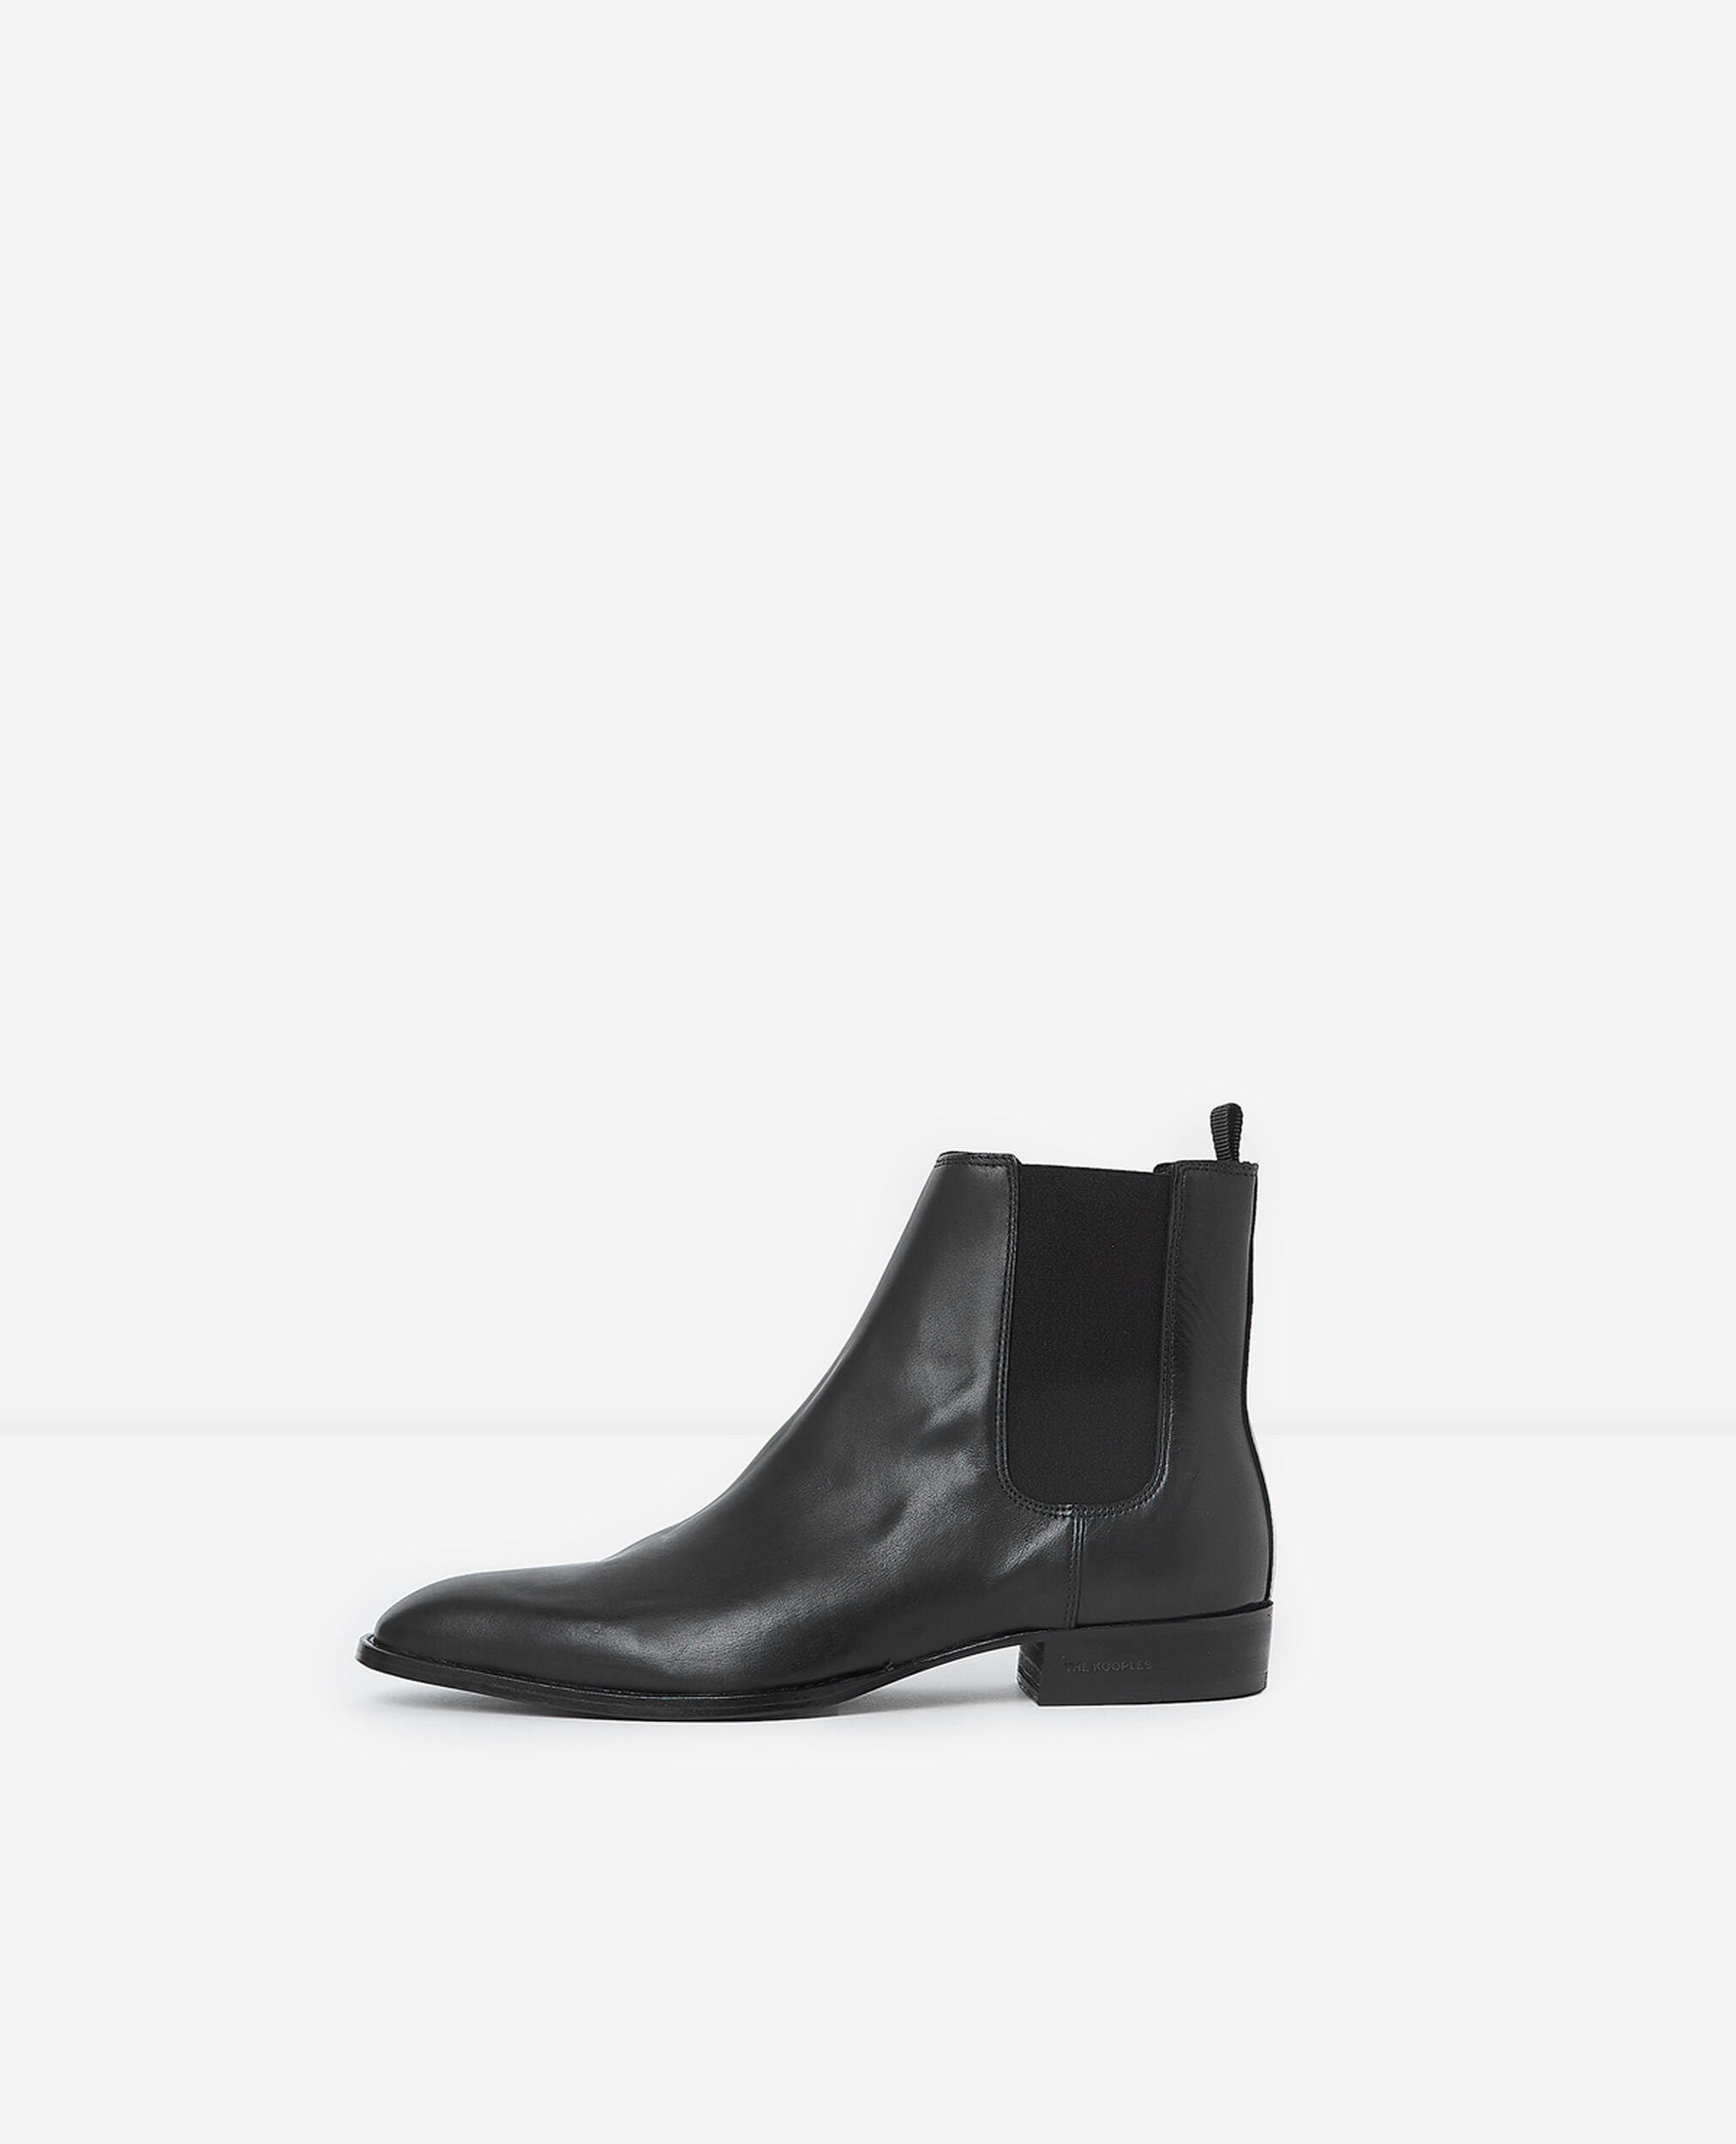 Flat black leather chelsea boots